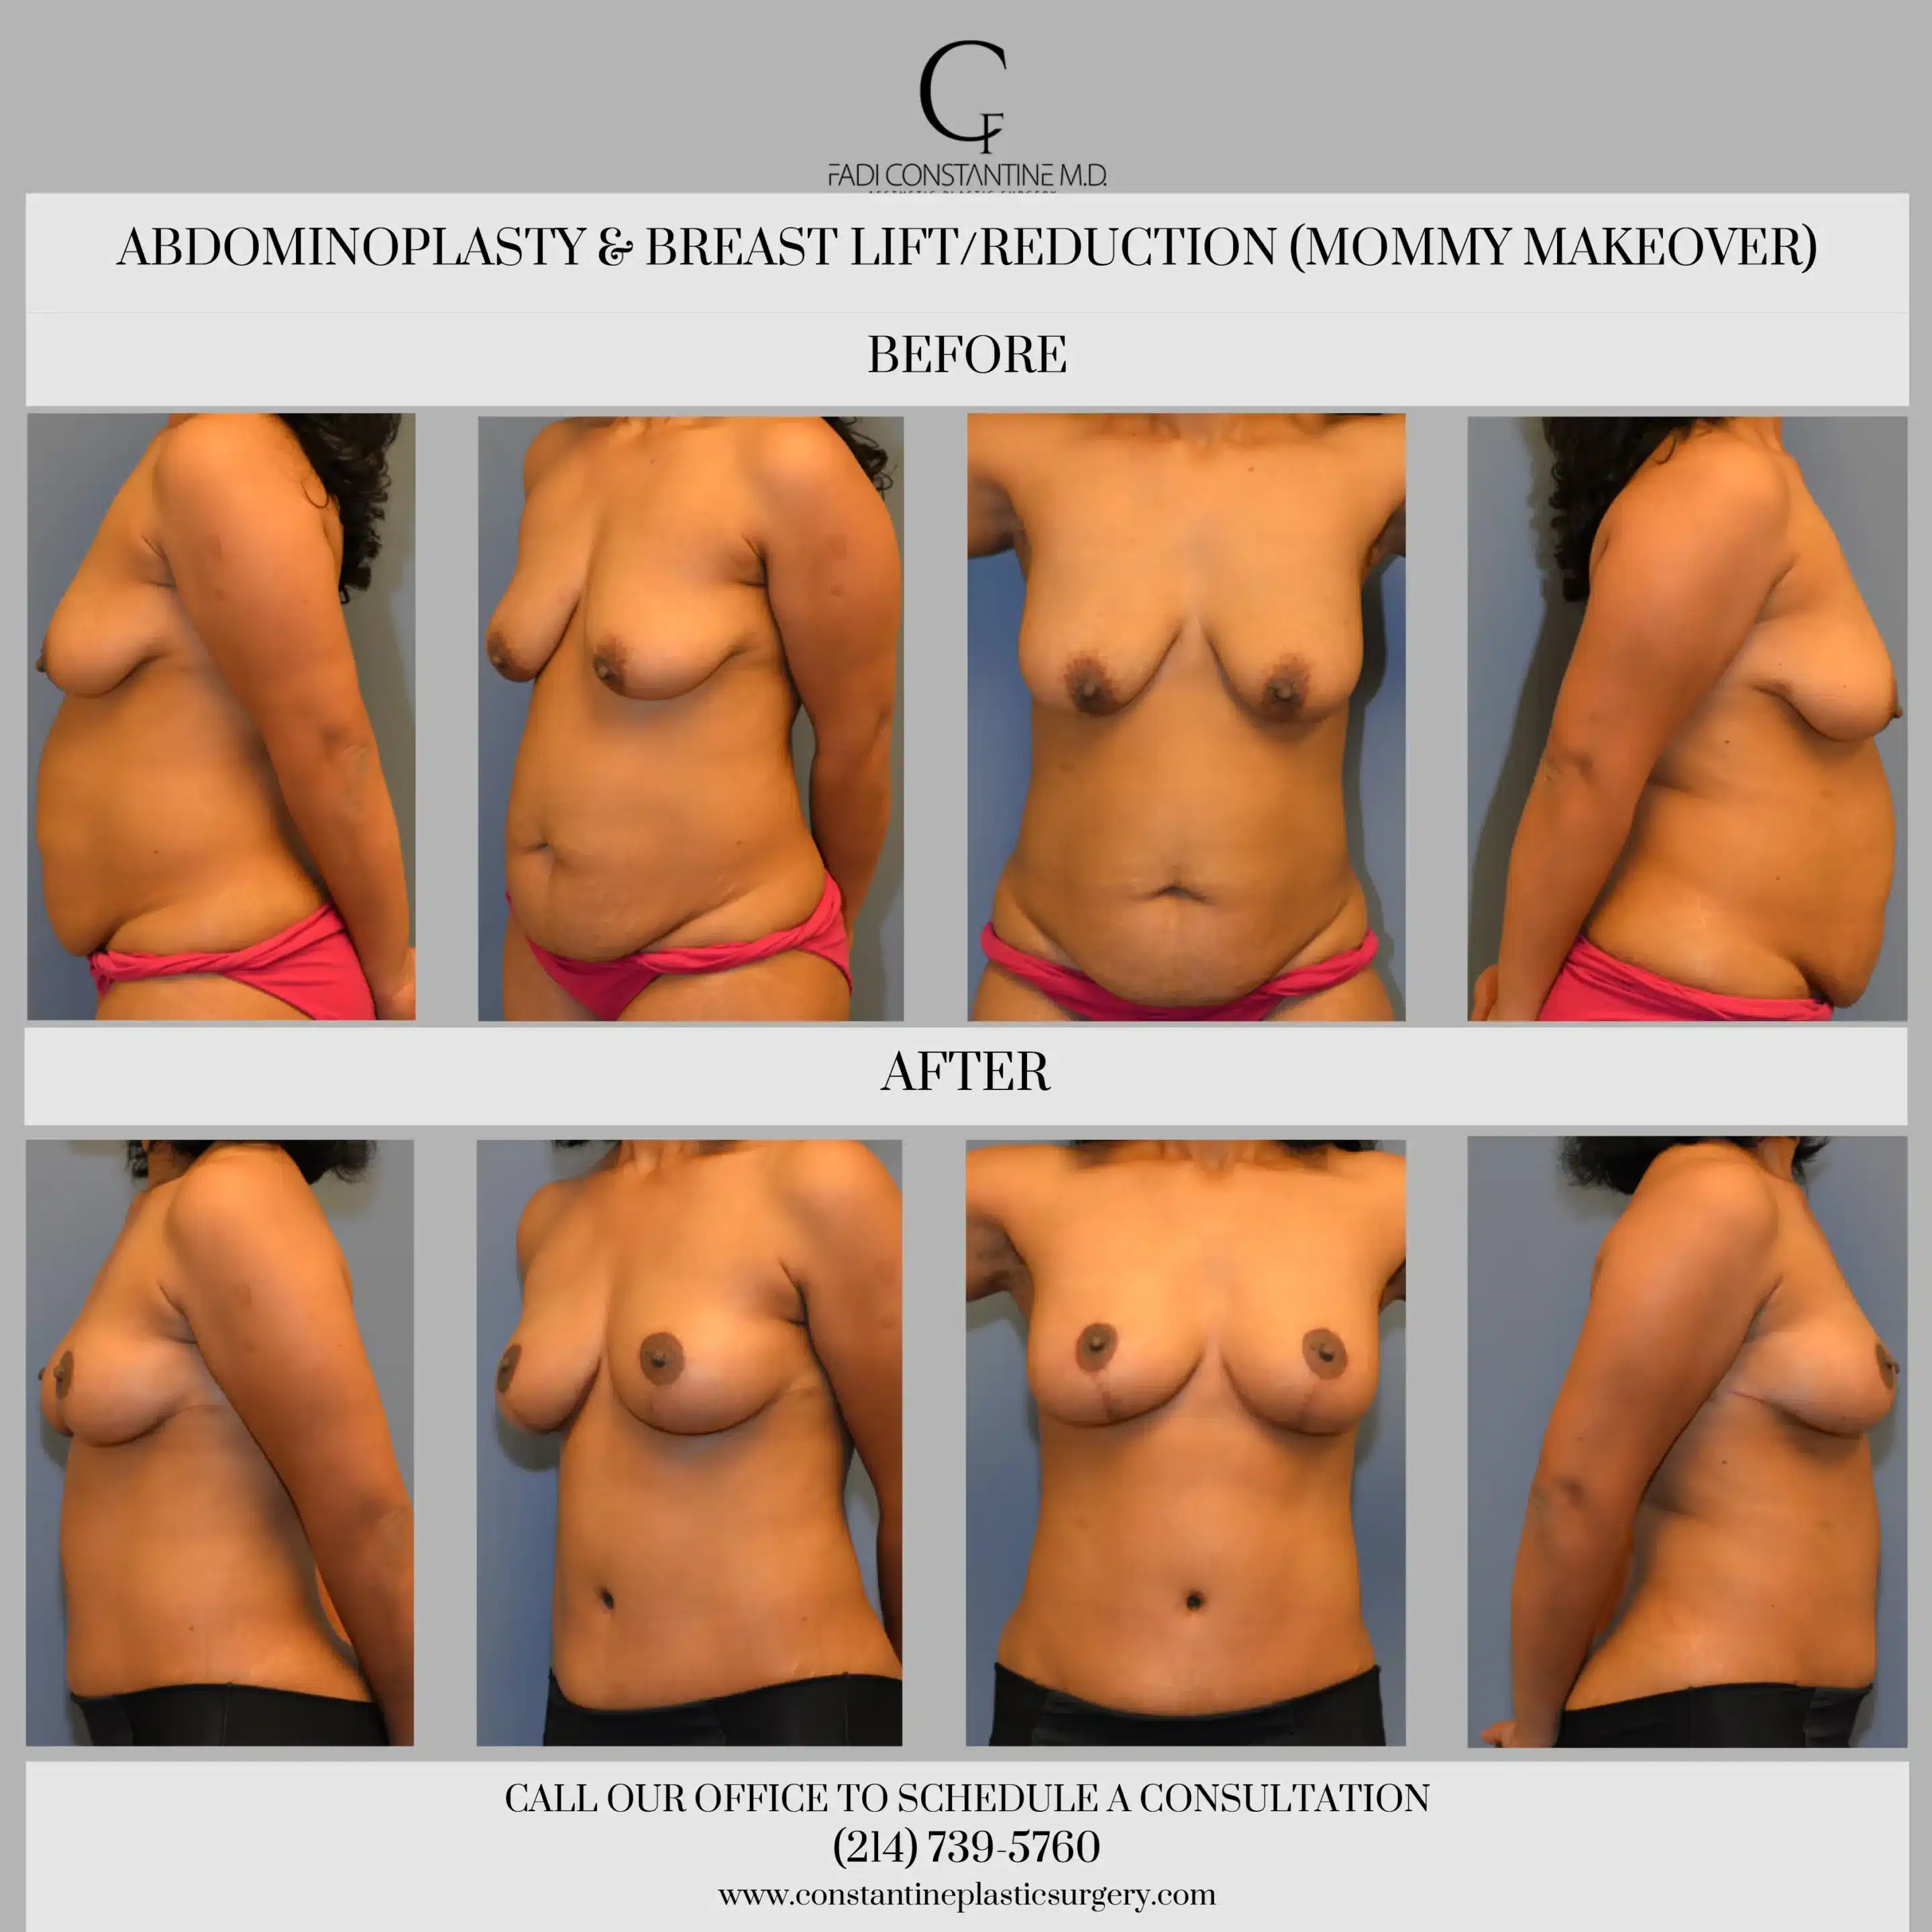 Do You Need a Breast Lift After Weight Loss?